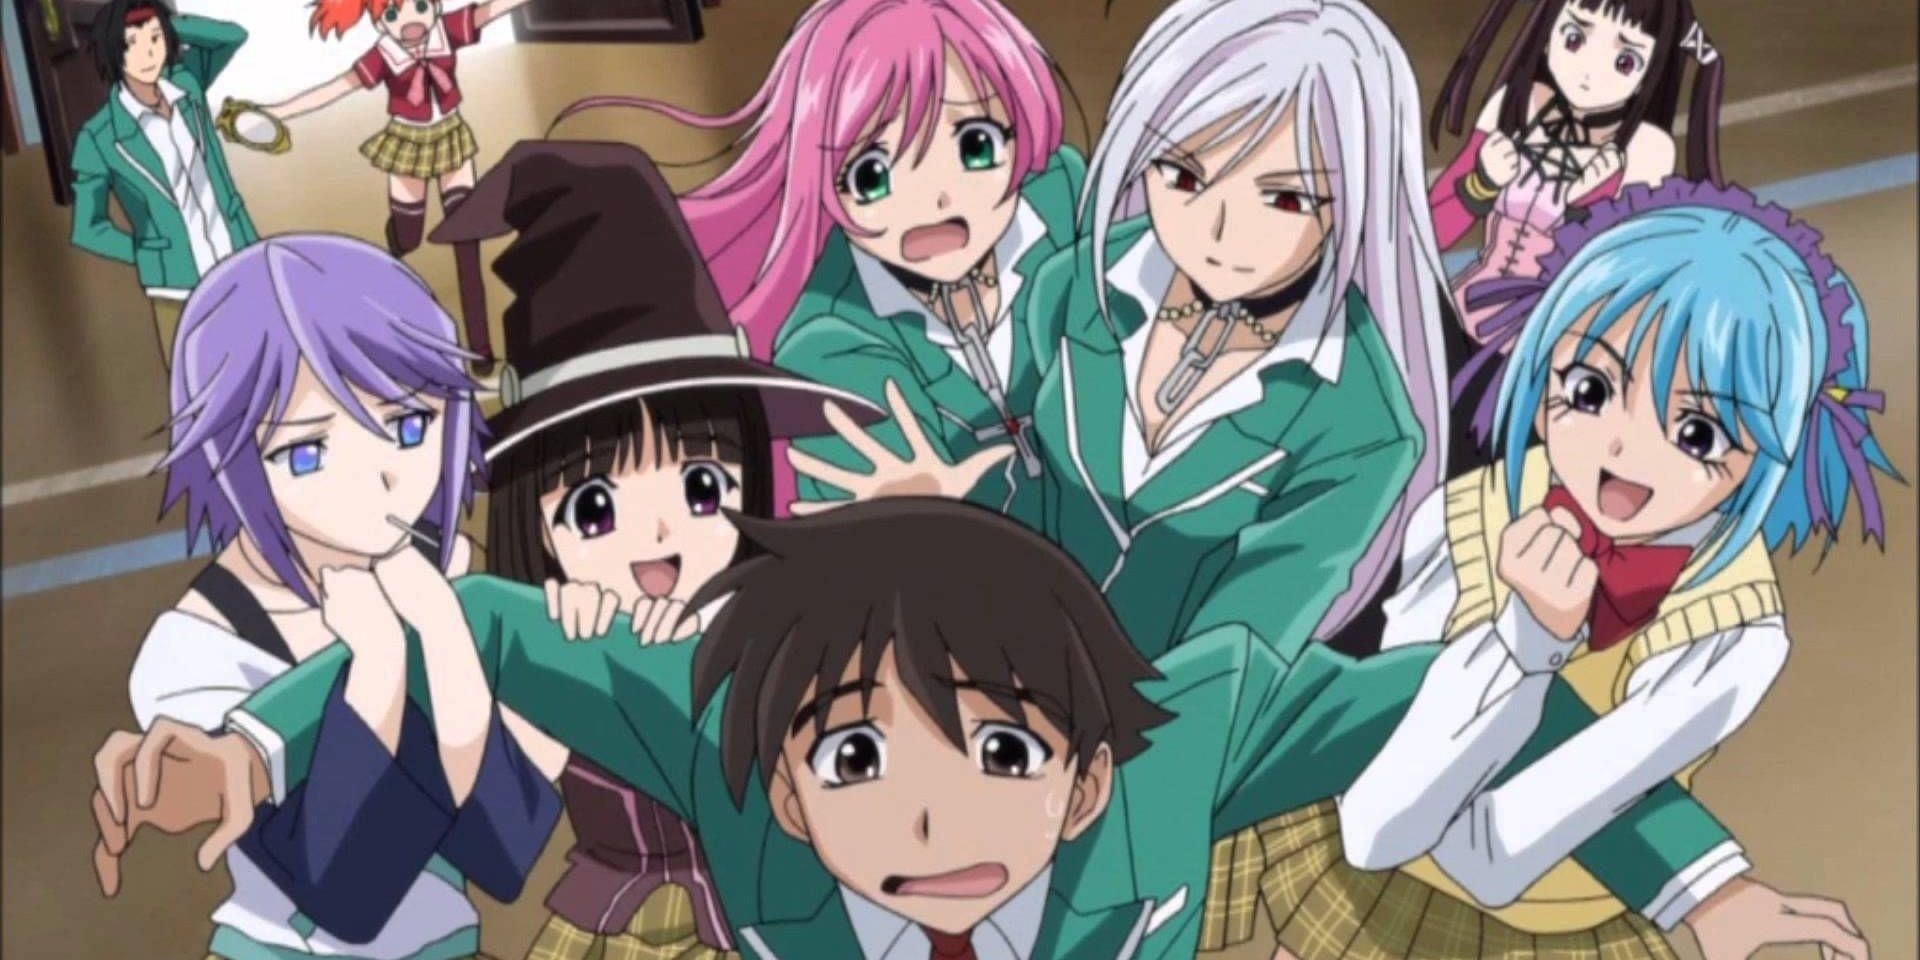 The cast of Rosario and Vampire